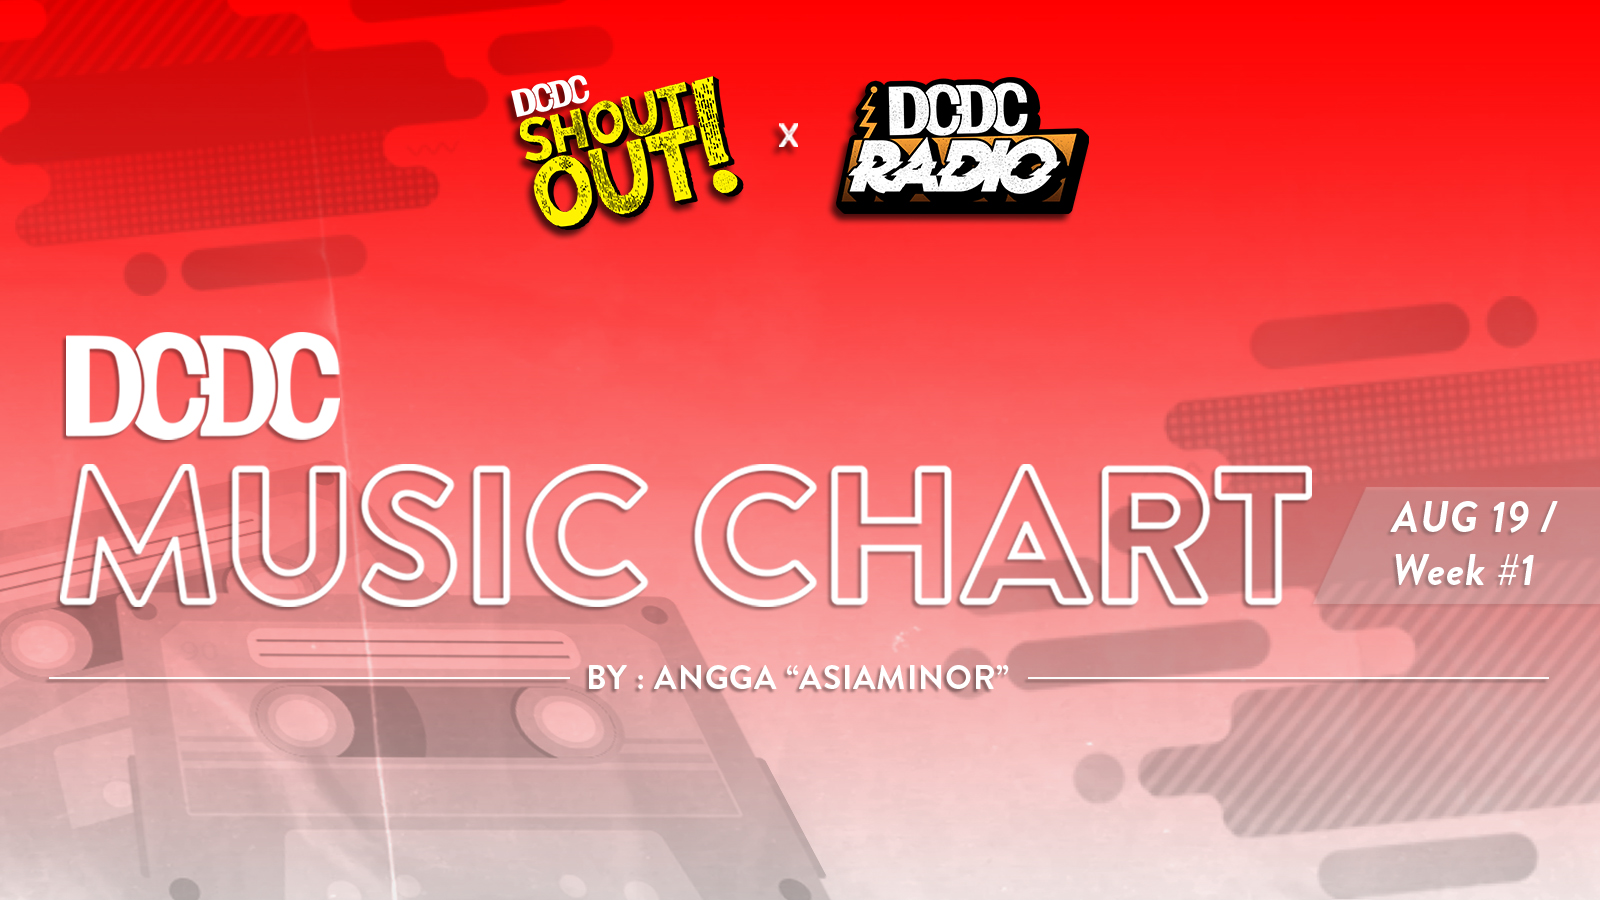 DCDC Music Chart - #1st Week of August 2019